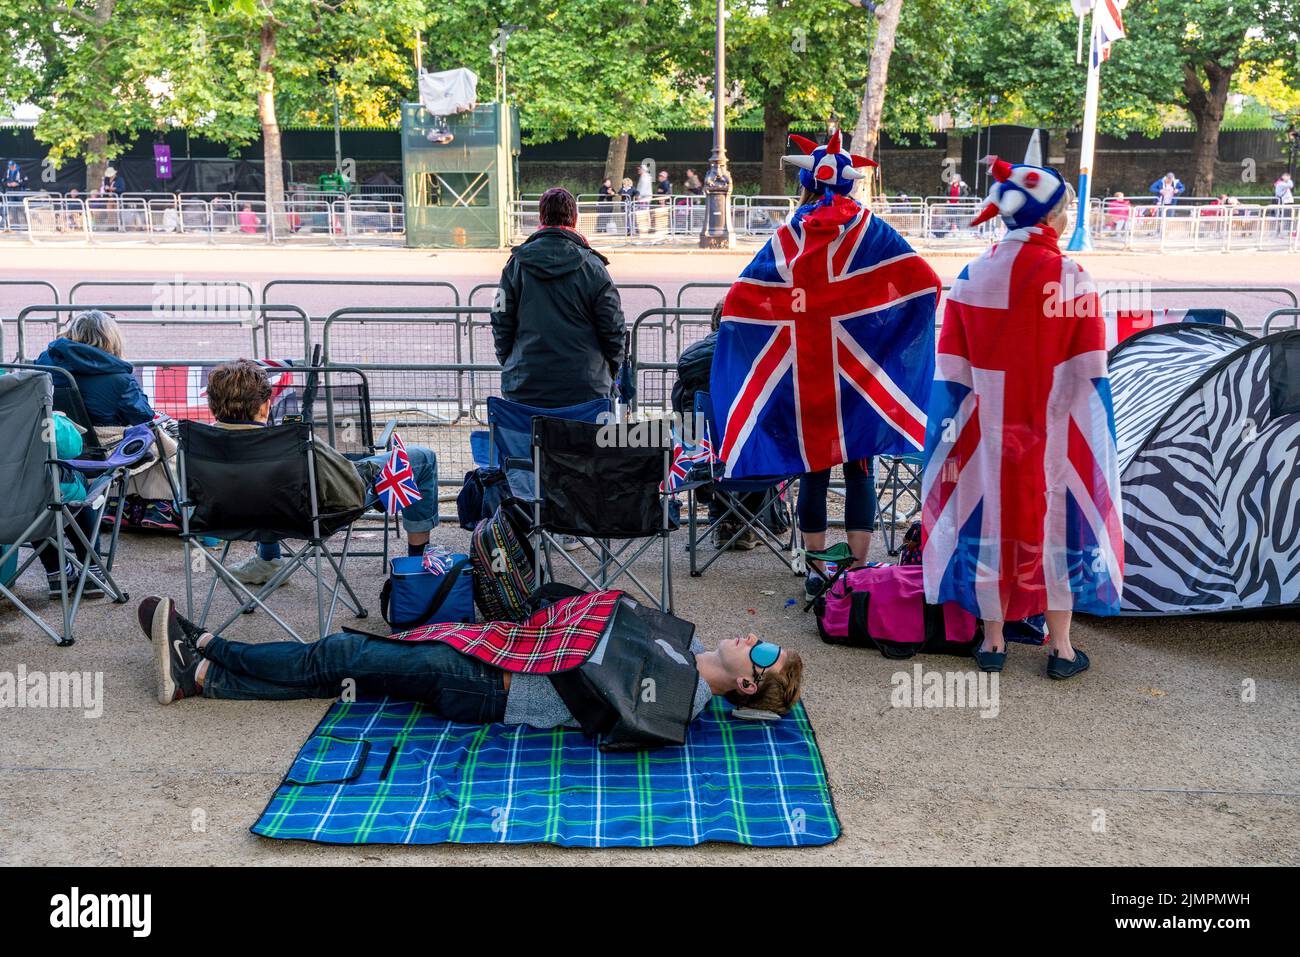 People Wake Up After Camping Out Overnight In The Mall To See The Queen's Birthday Parade During The Queen's Platinum Jubilee Celebrations, London, UK Stock Photo